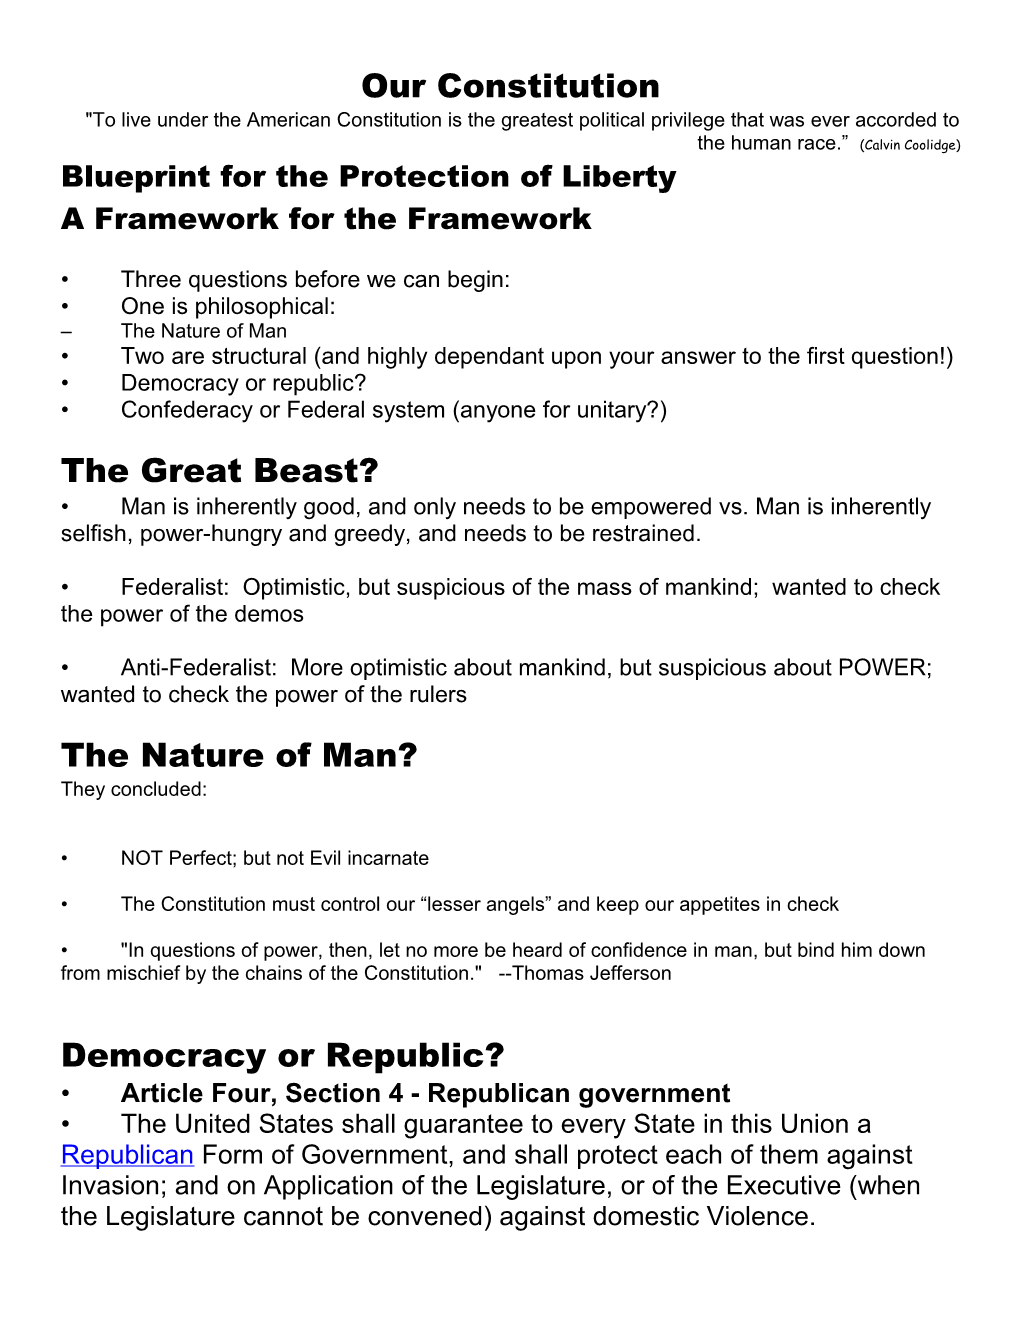 Blueprint for the Protection of Liberty